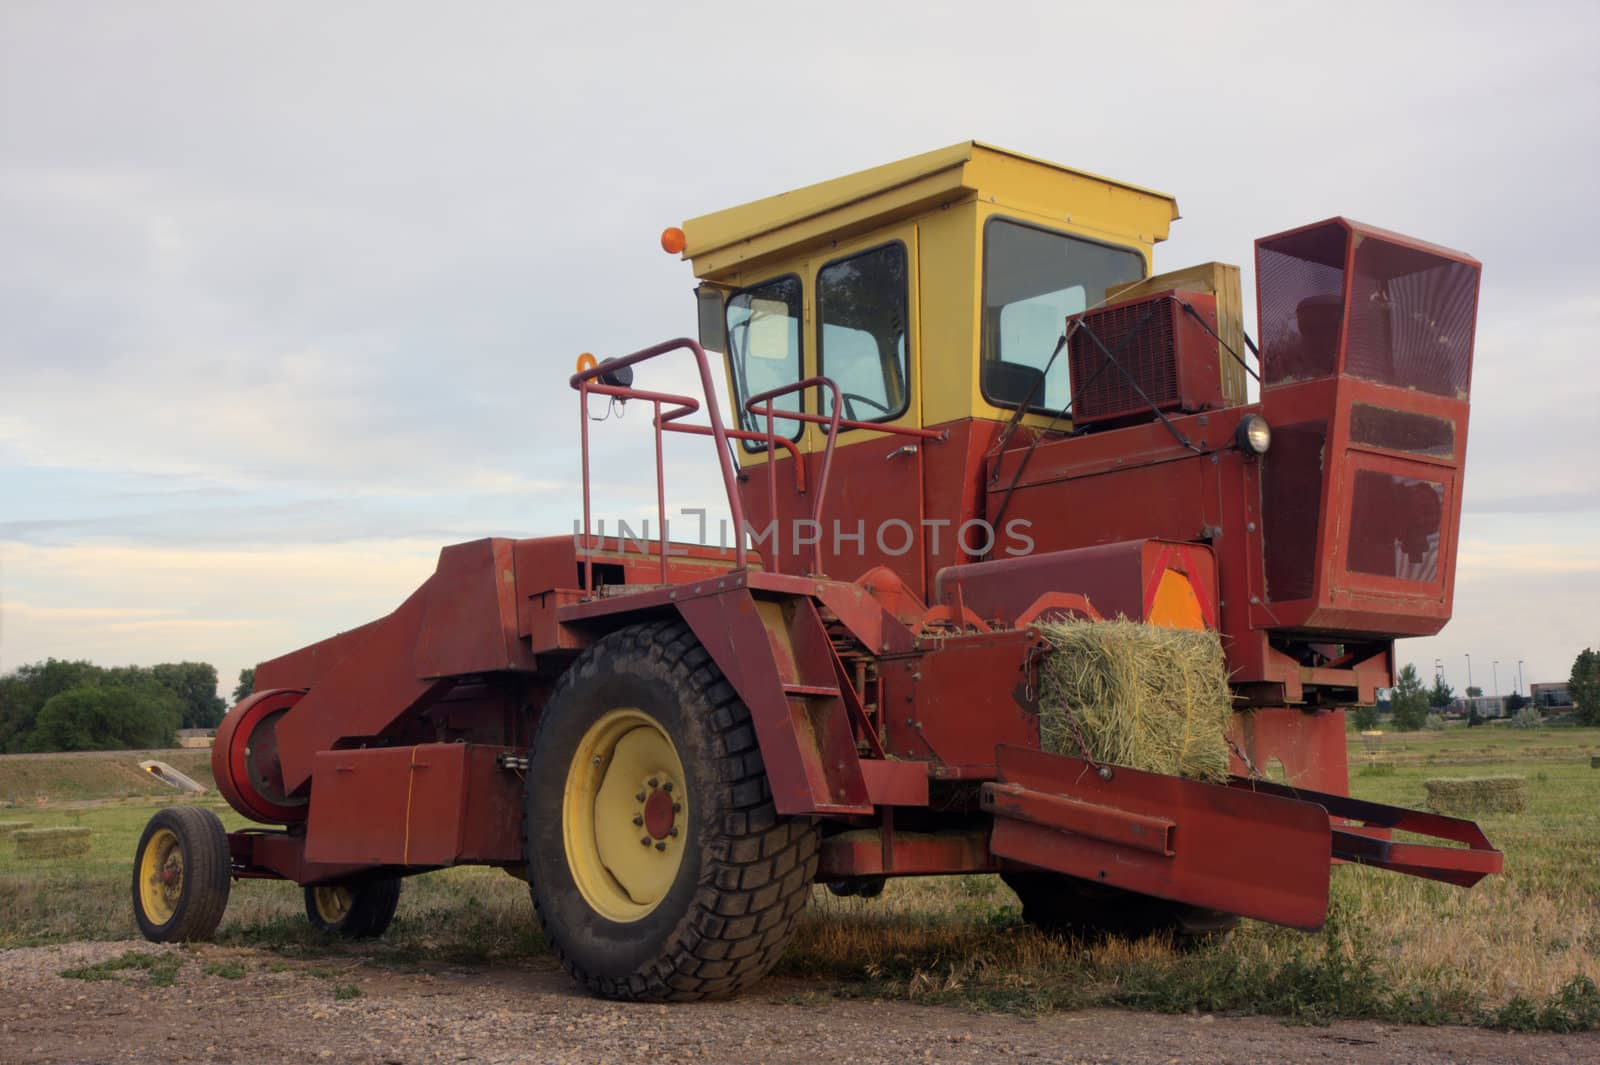 a small square hay baler in a field after harvest, HDR image